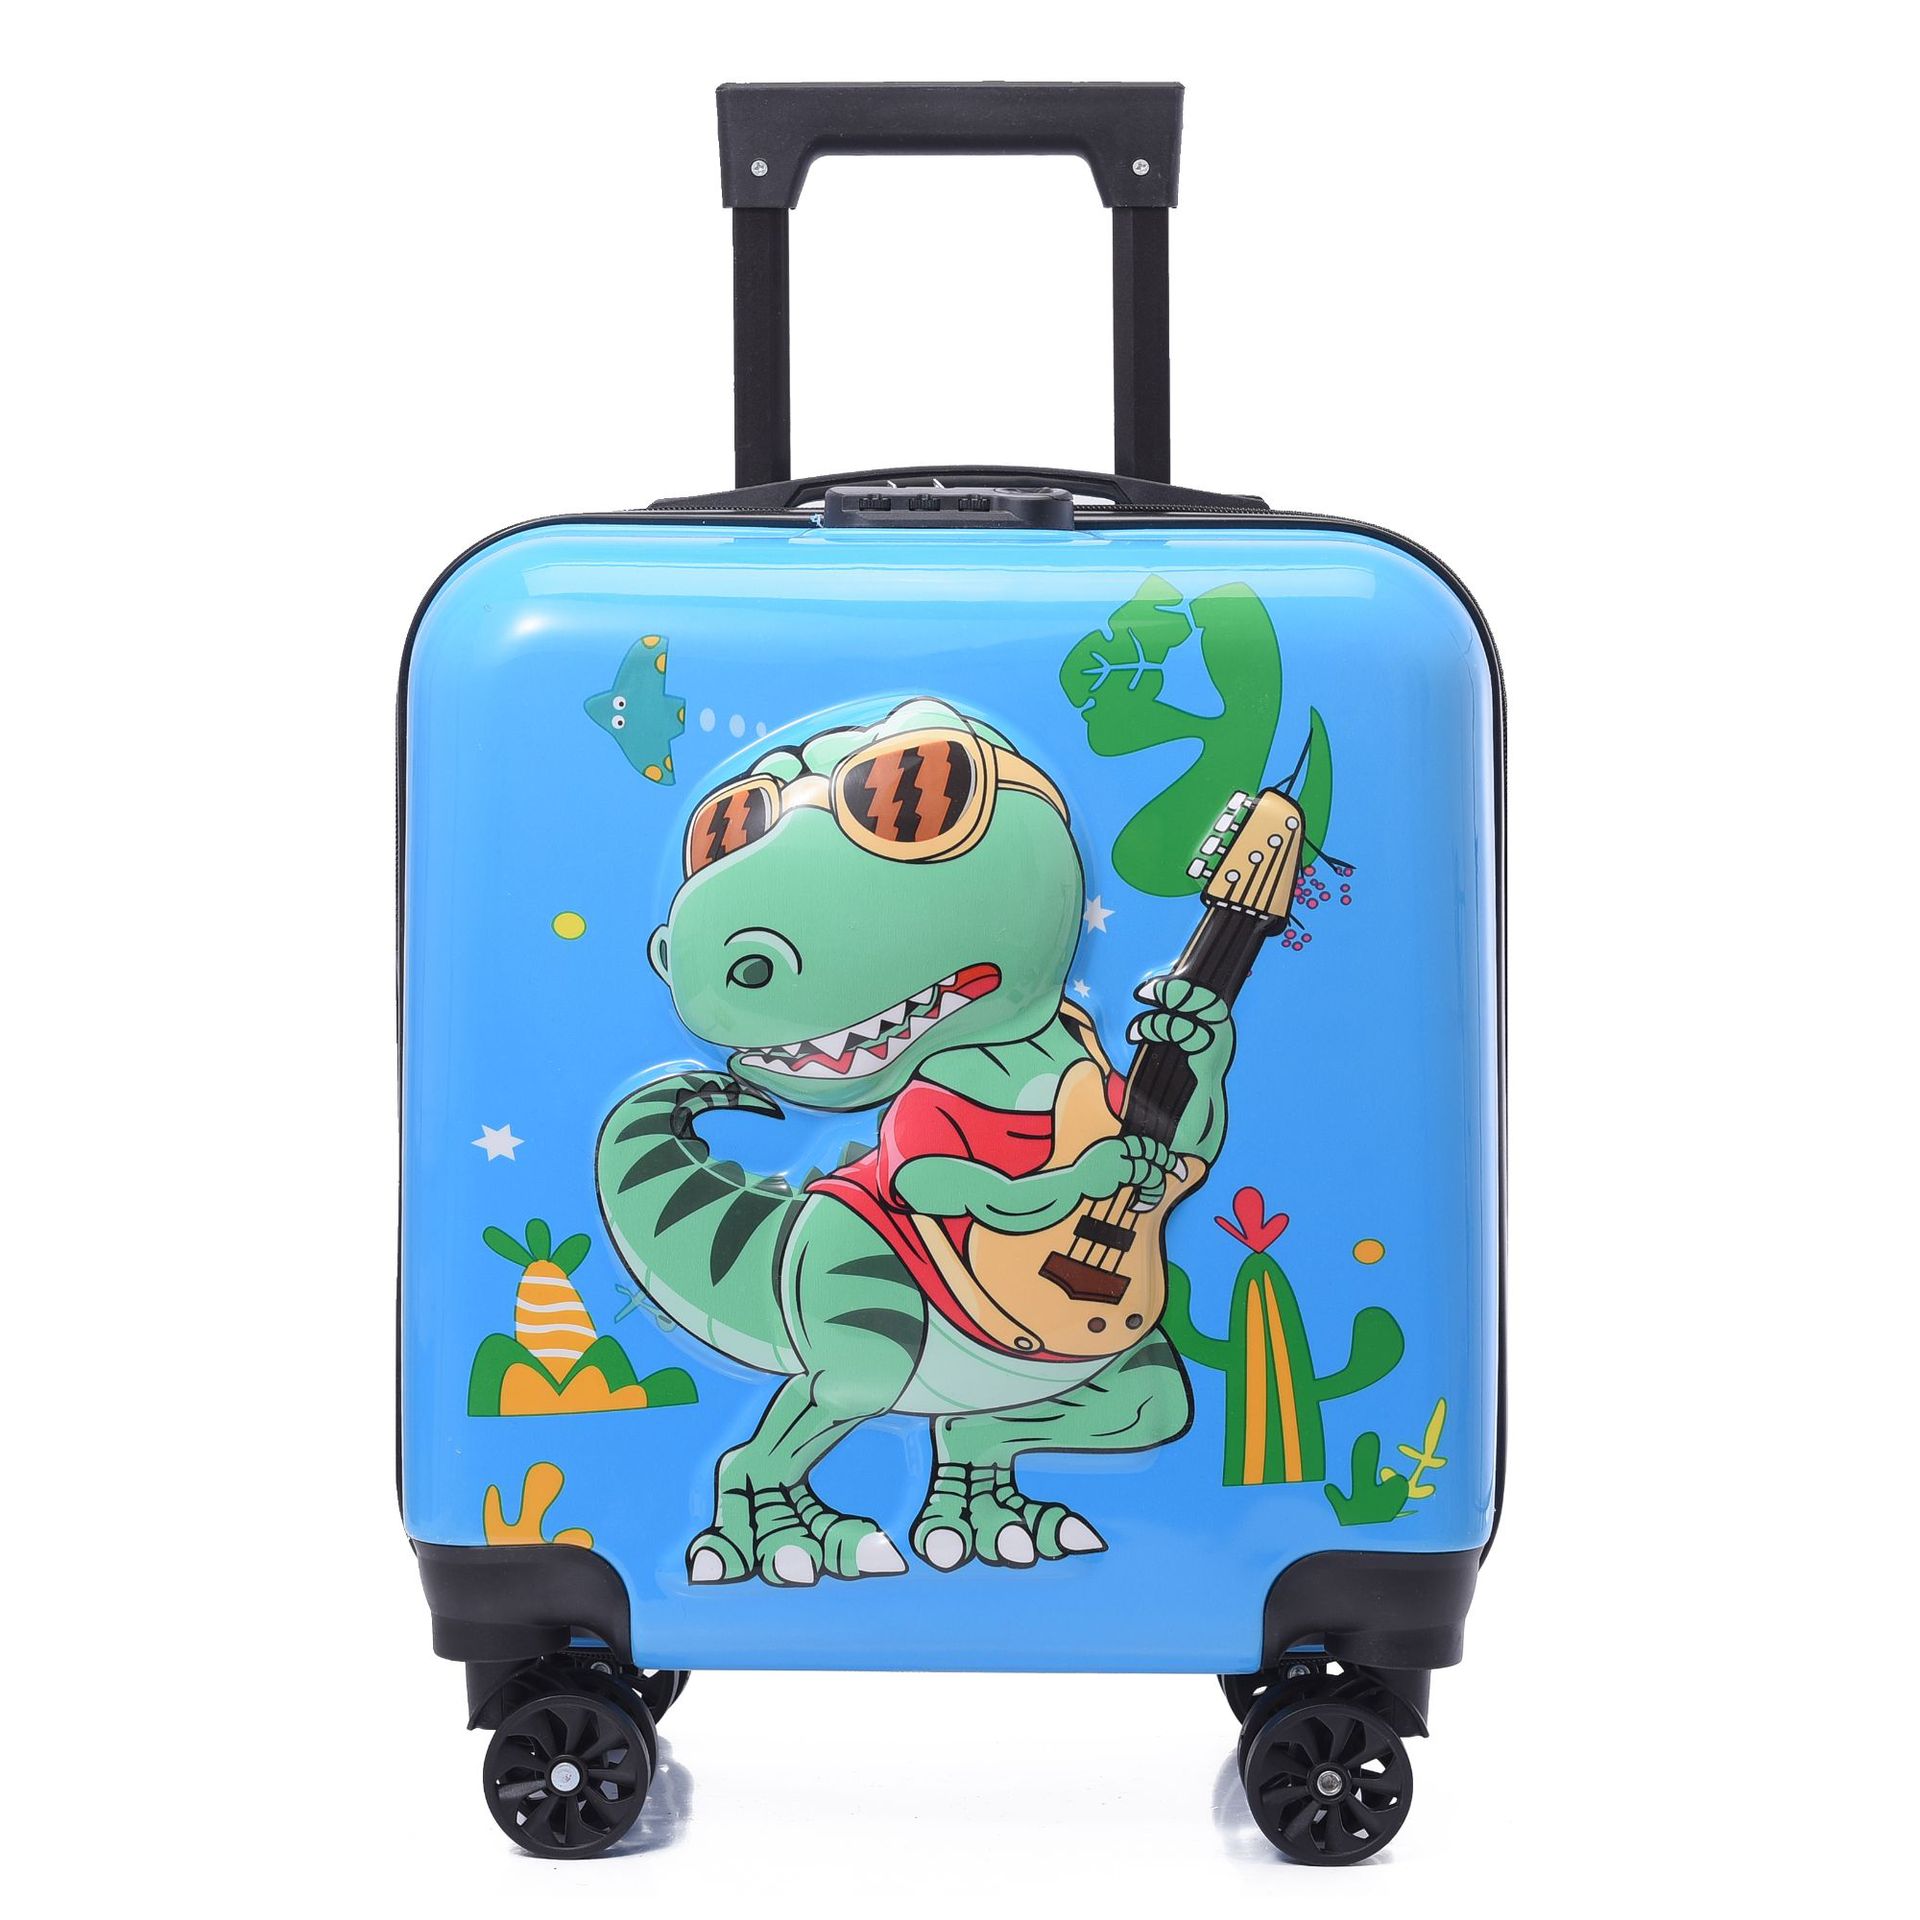 New Children's Luggage Cute Cartoon 18-Inch Luggage 3d Animal Universal Wheel Student Suitcase Wholesale